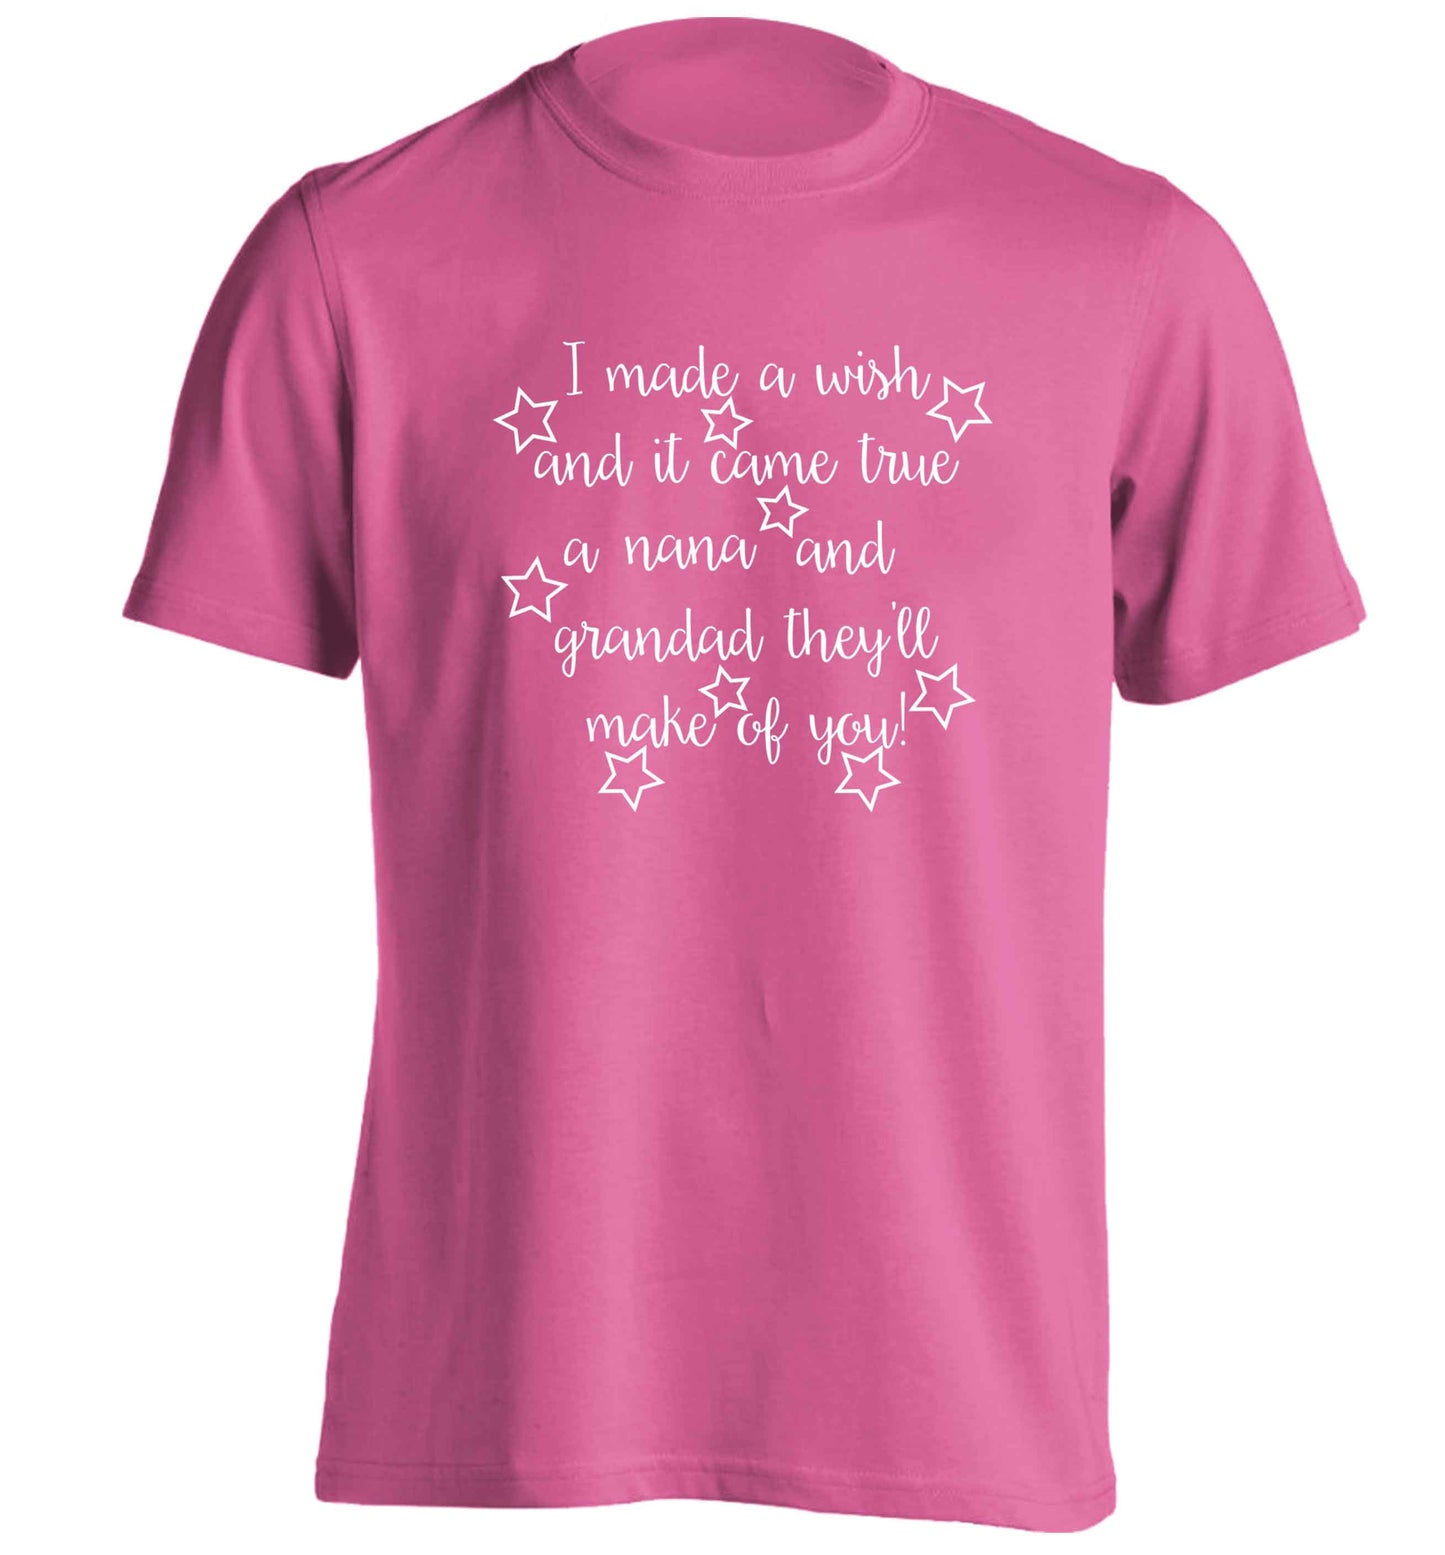 I made a wish and it came true a nana and grandad they'll make of you! adults unisex pink Tshirt 2XL